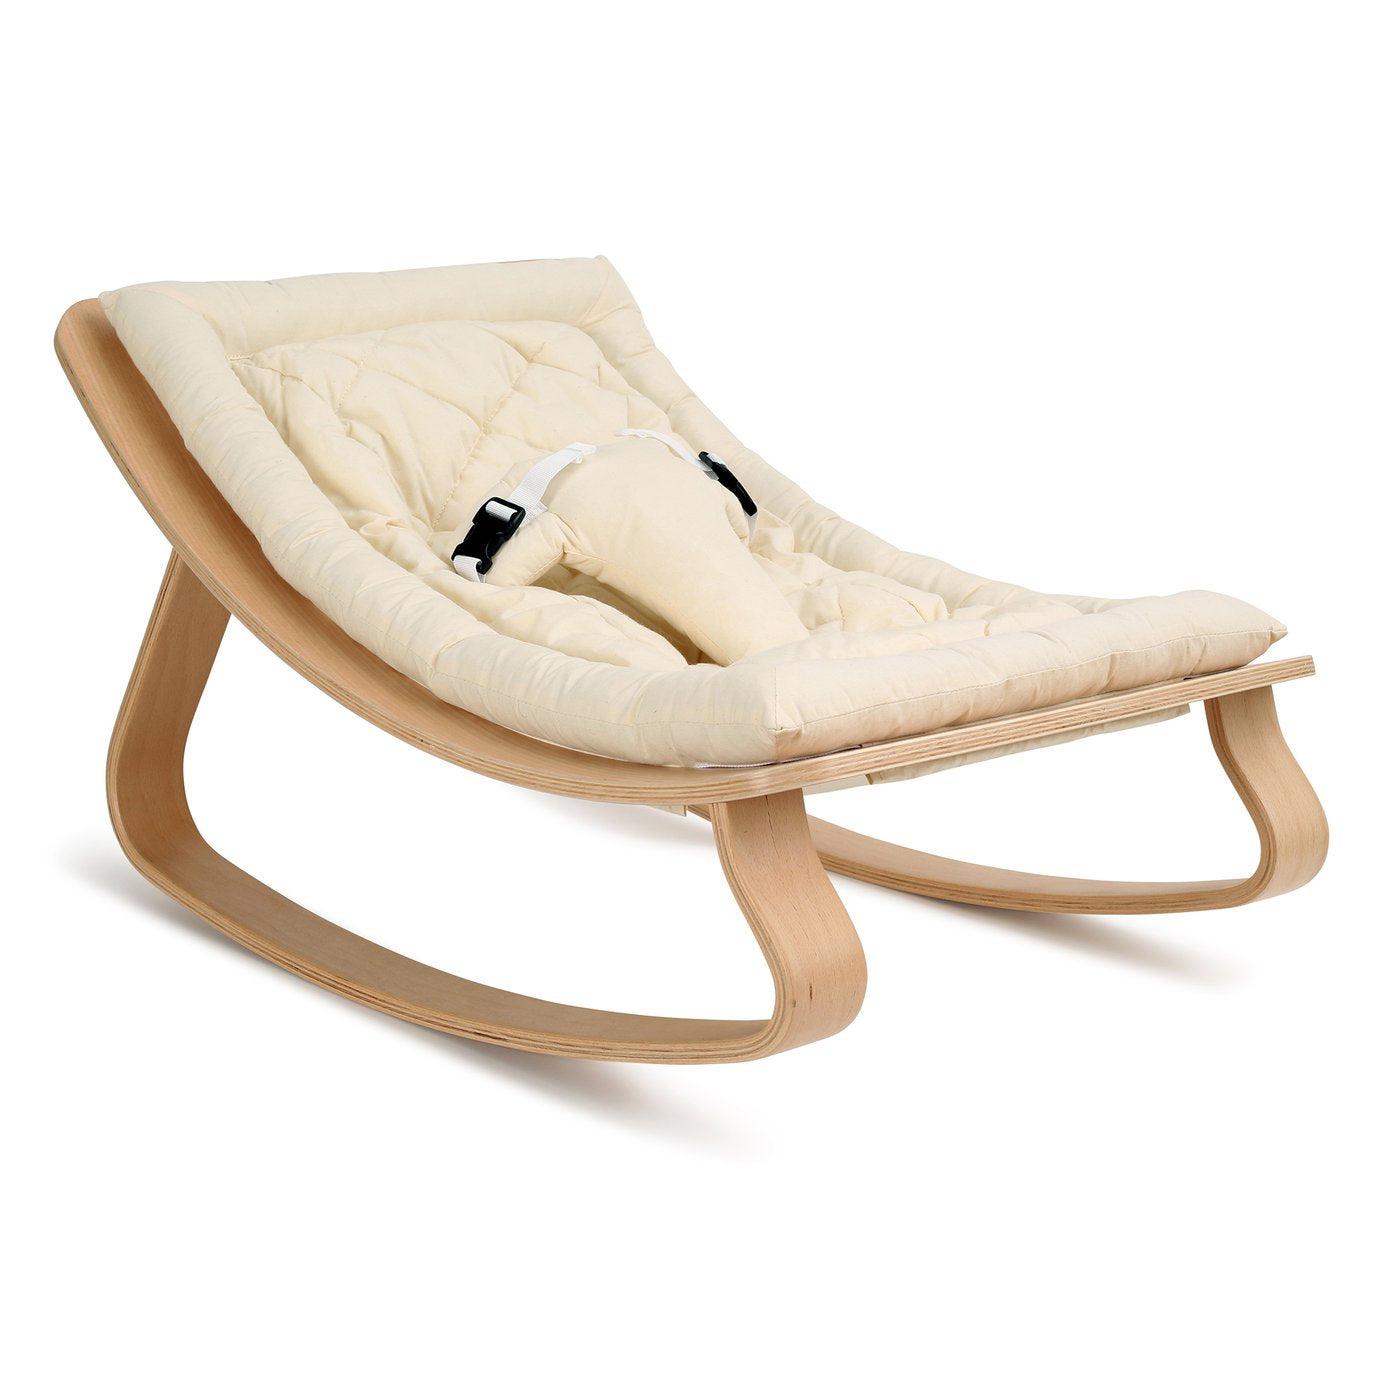 A wooden baby rocker by Charlie Crane featuring an organic white cushion.